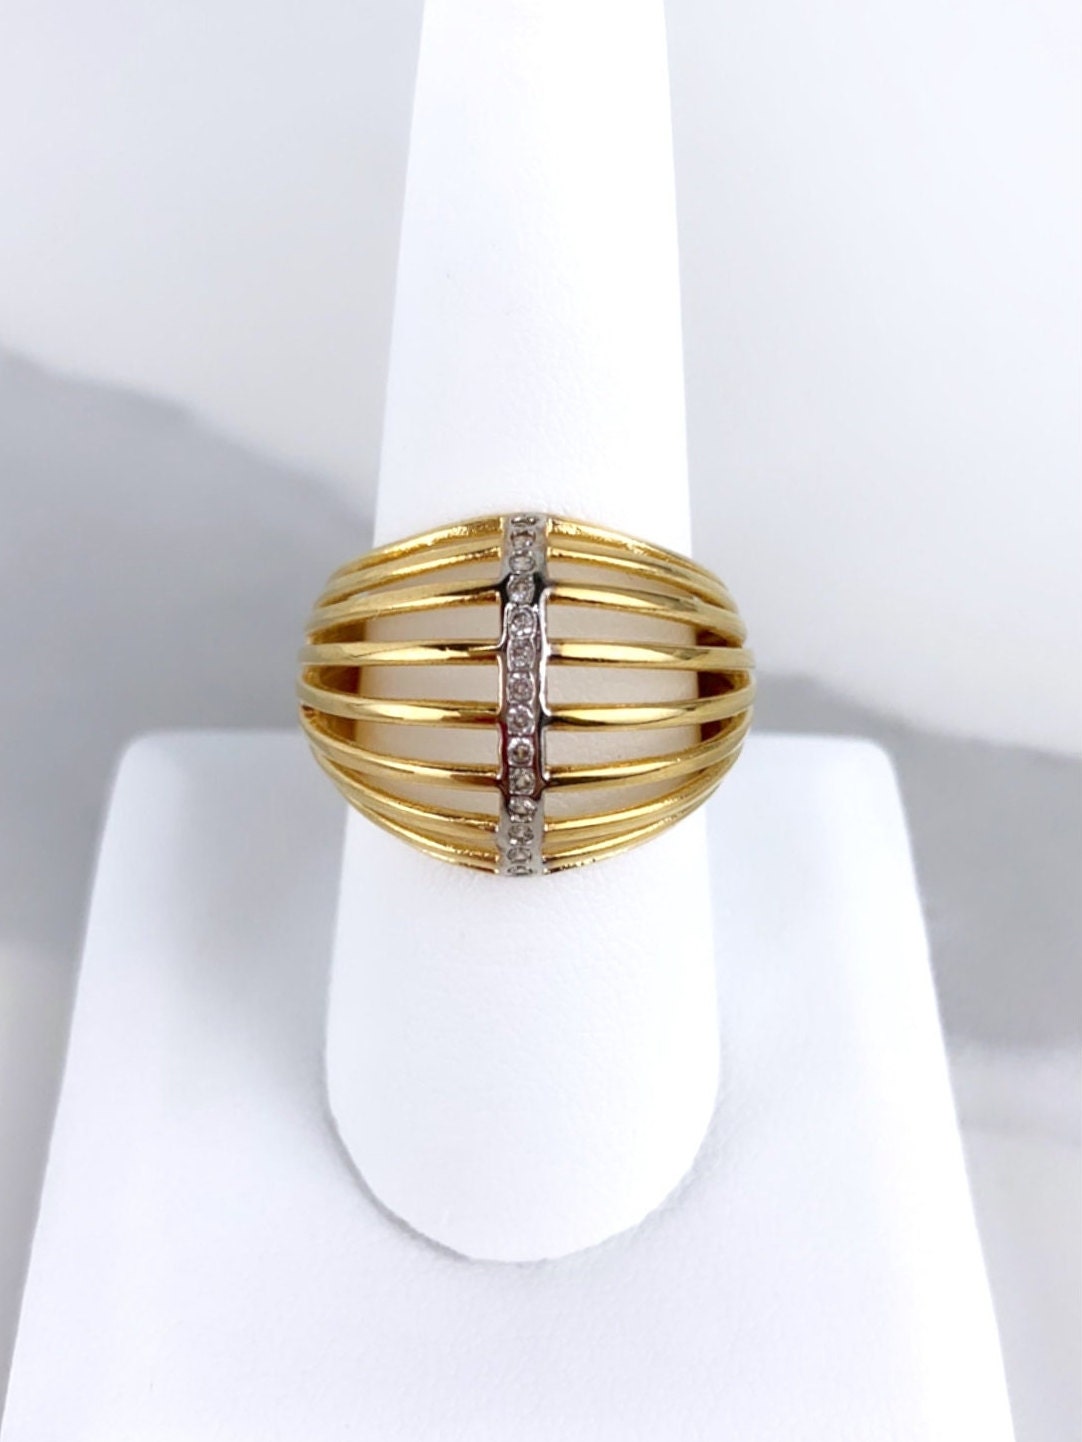 18k Gold Filled Hollow Dome Ring Featuring Cubic Zirconia Detail Availiable Gold or Silver Wholesale Jewelry Supplies